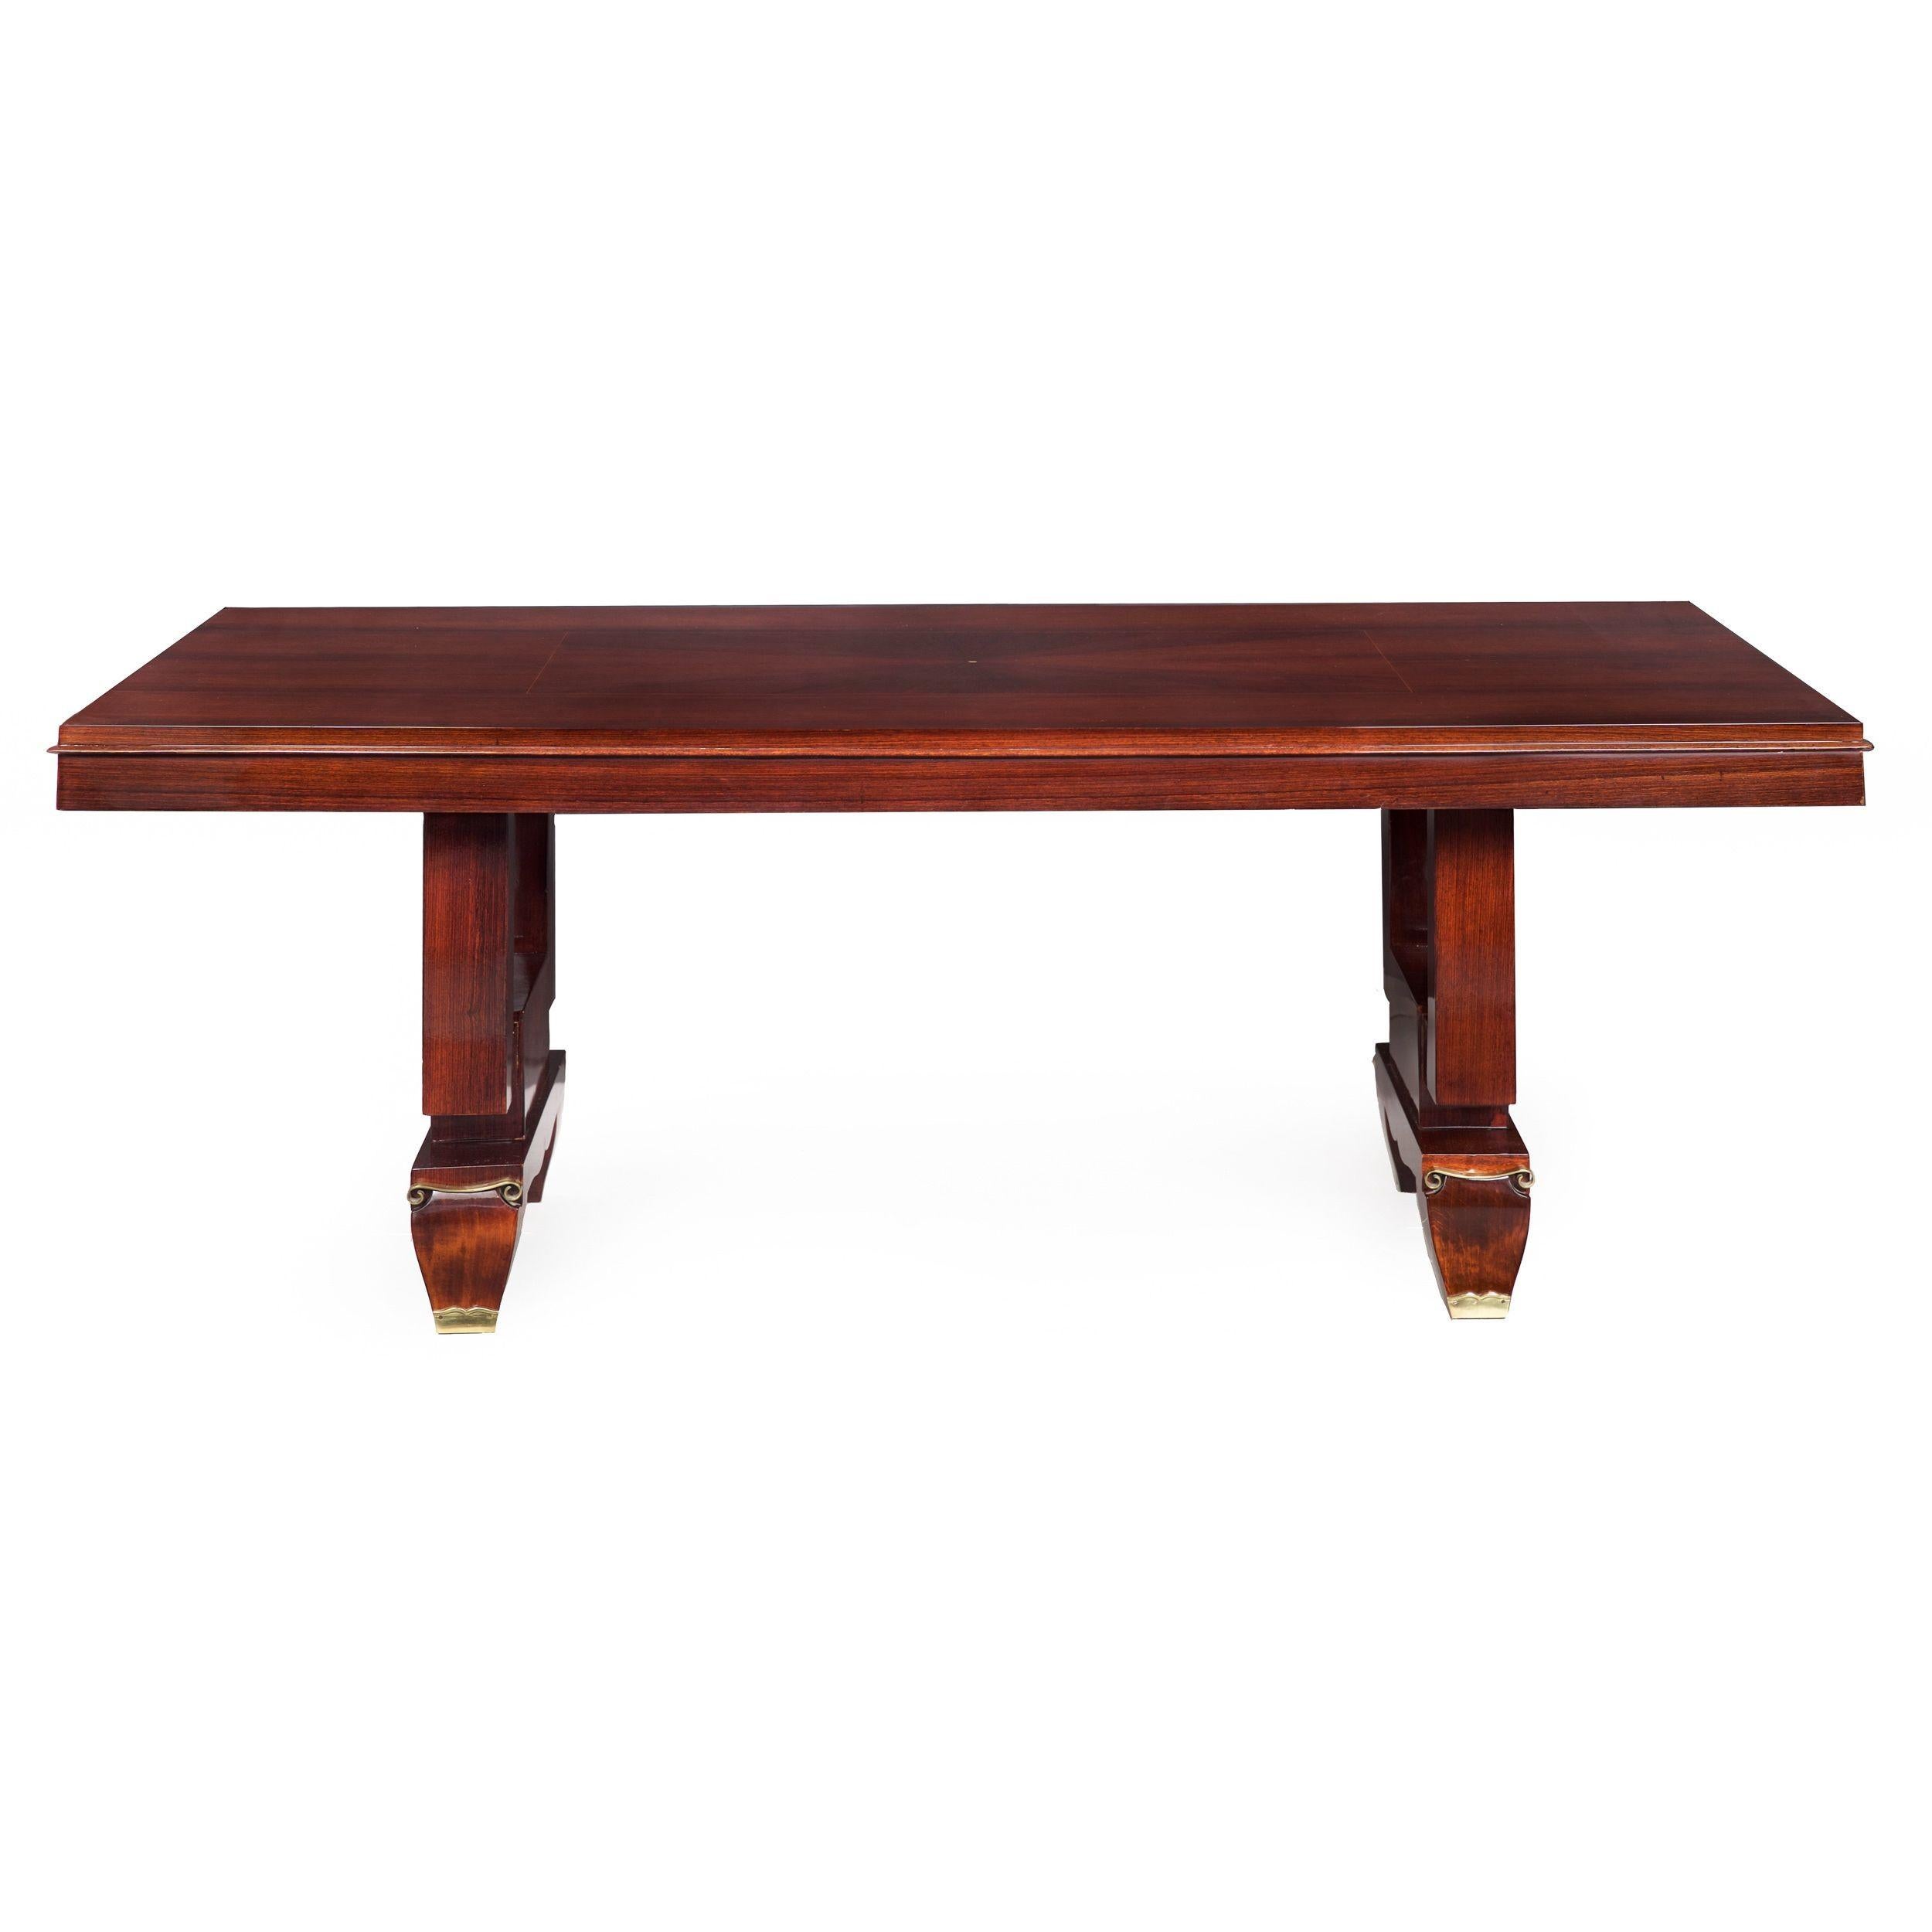 French Art Deco Inlaid Mother-of-Pearl Rosewood Dining Table, circa 1940s For Sale 9